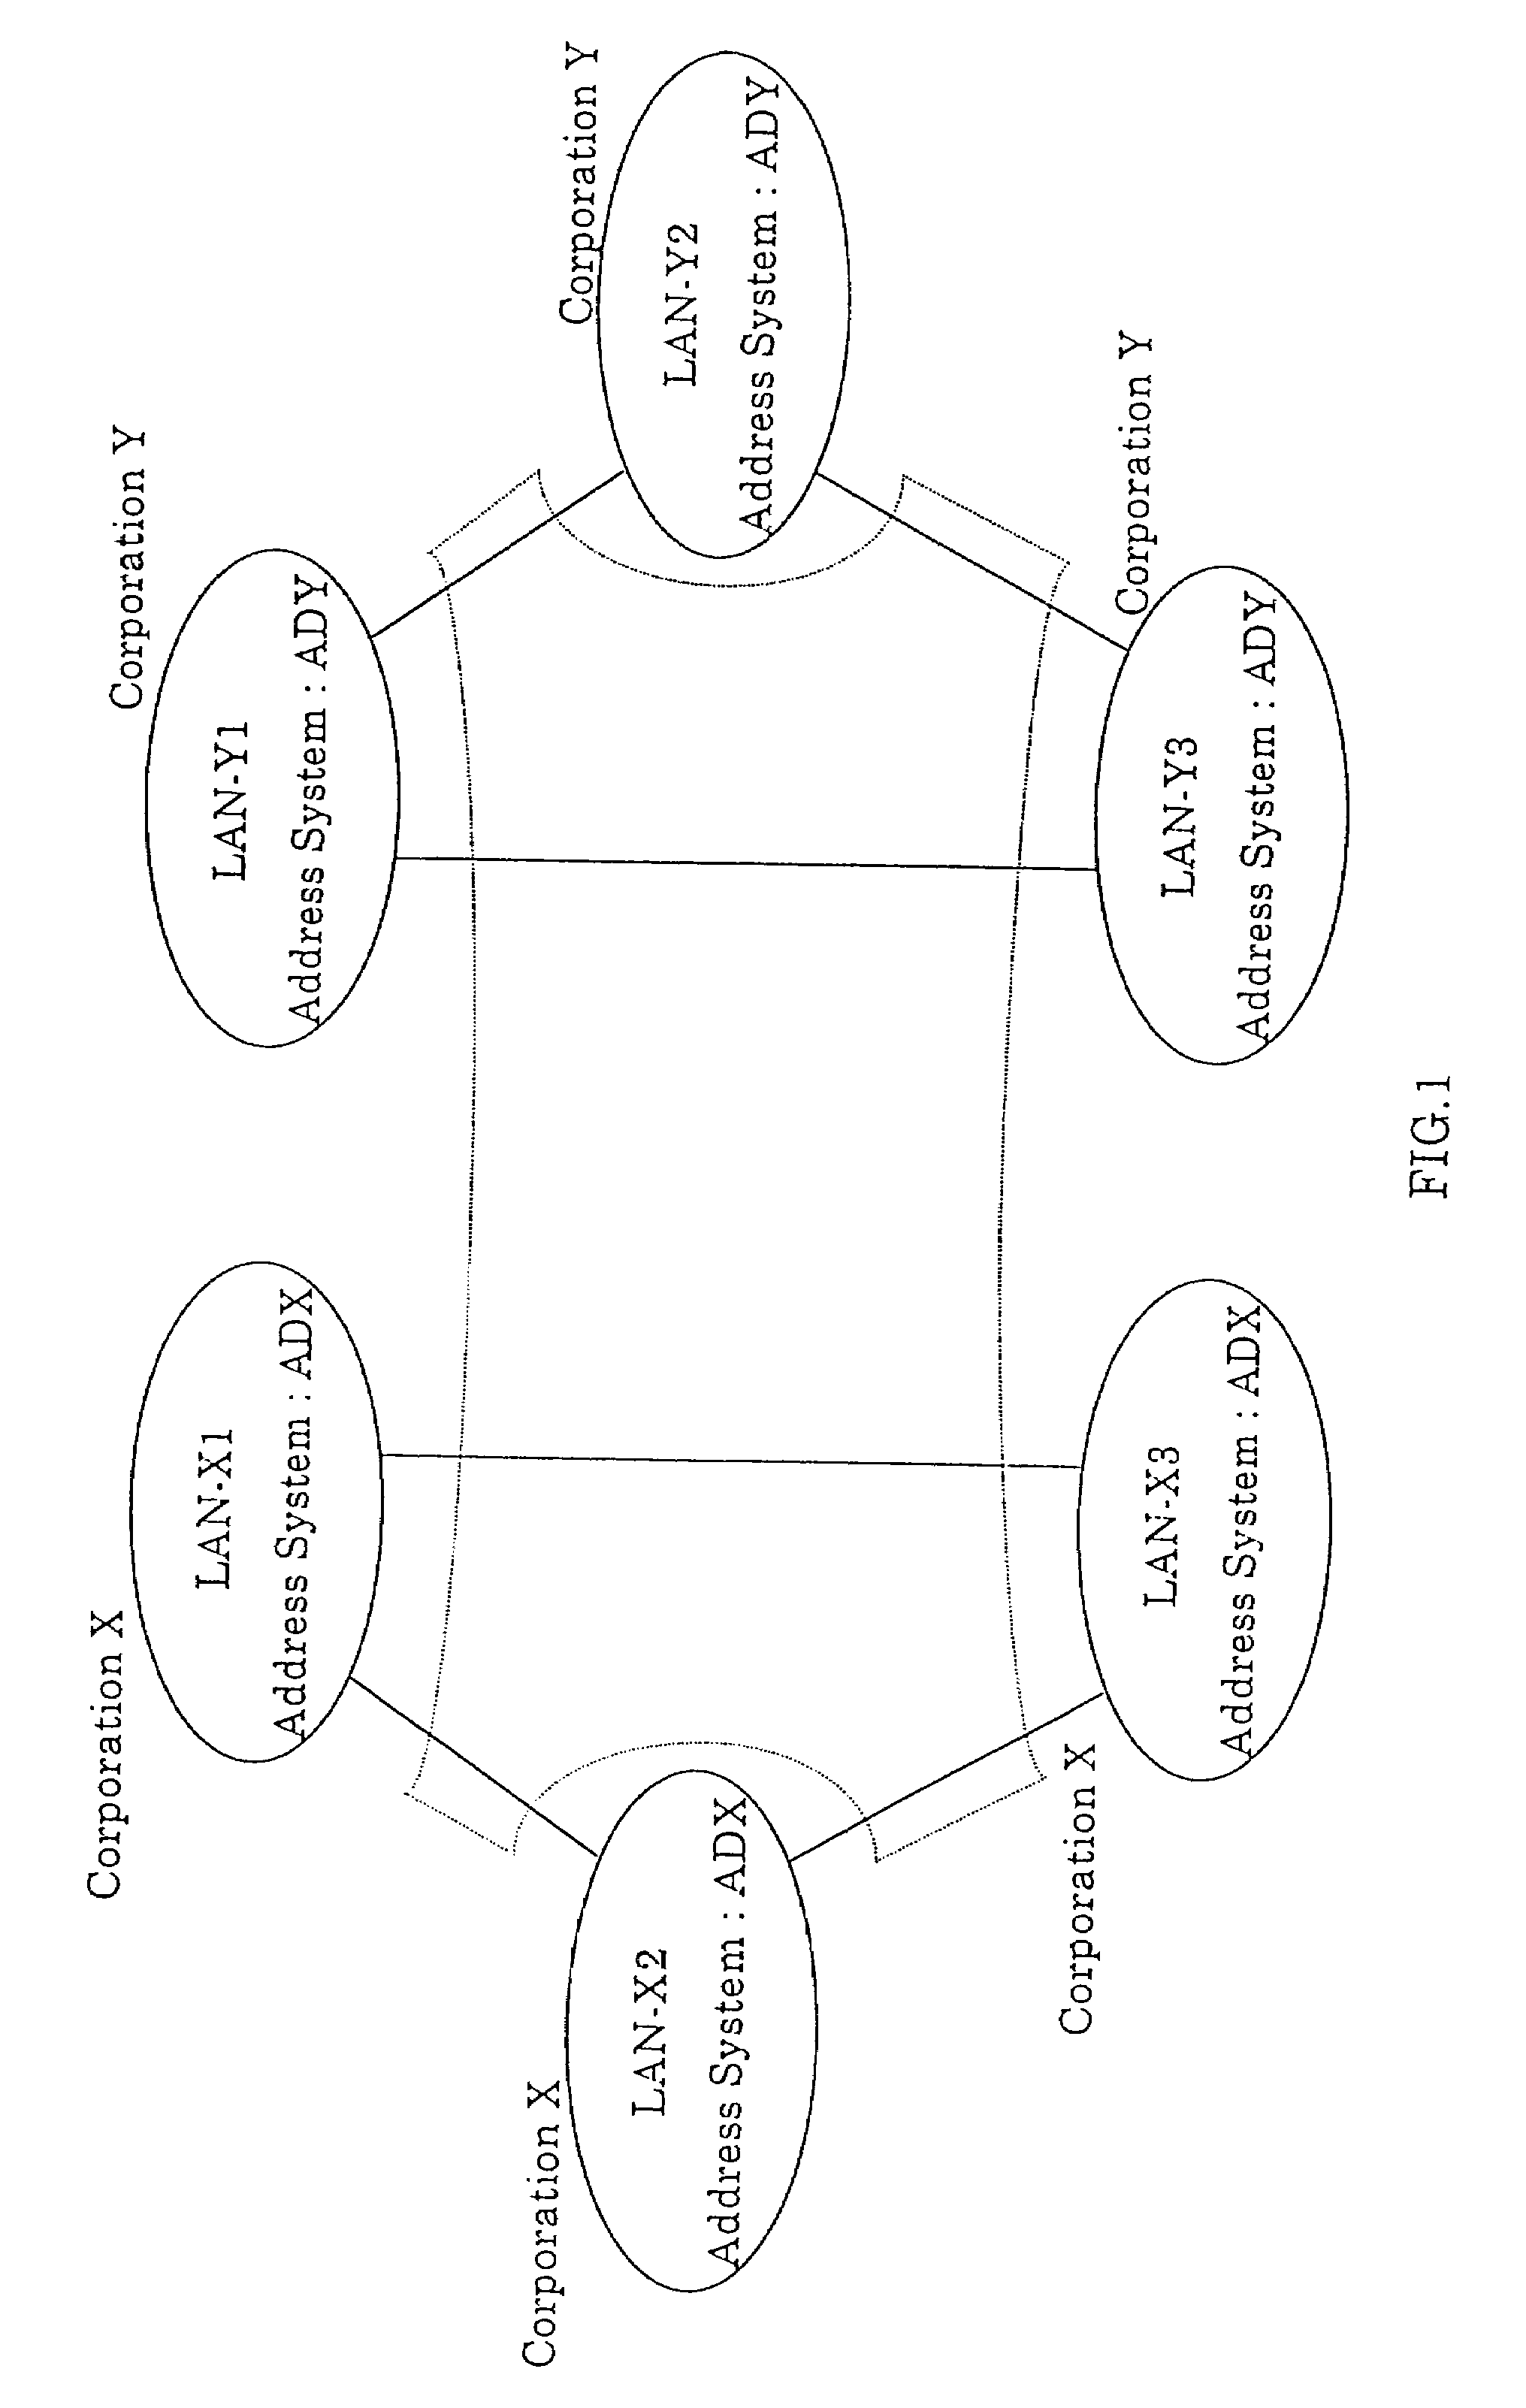 Integrated information communication system using internet protocol